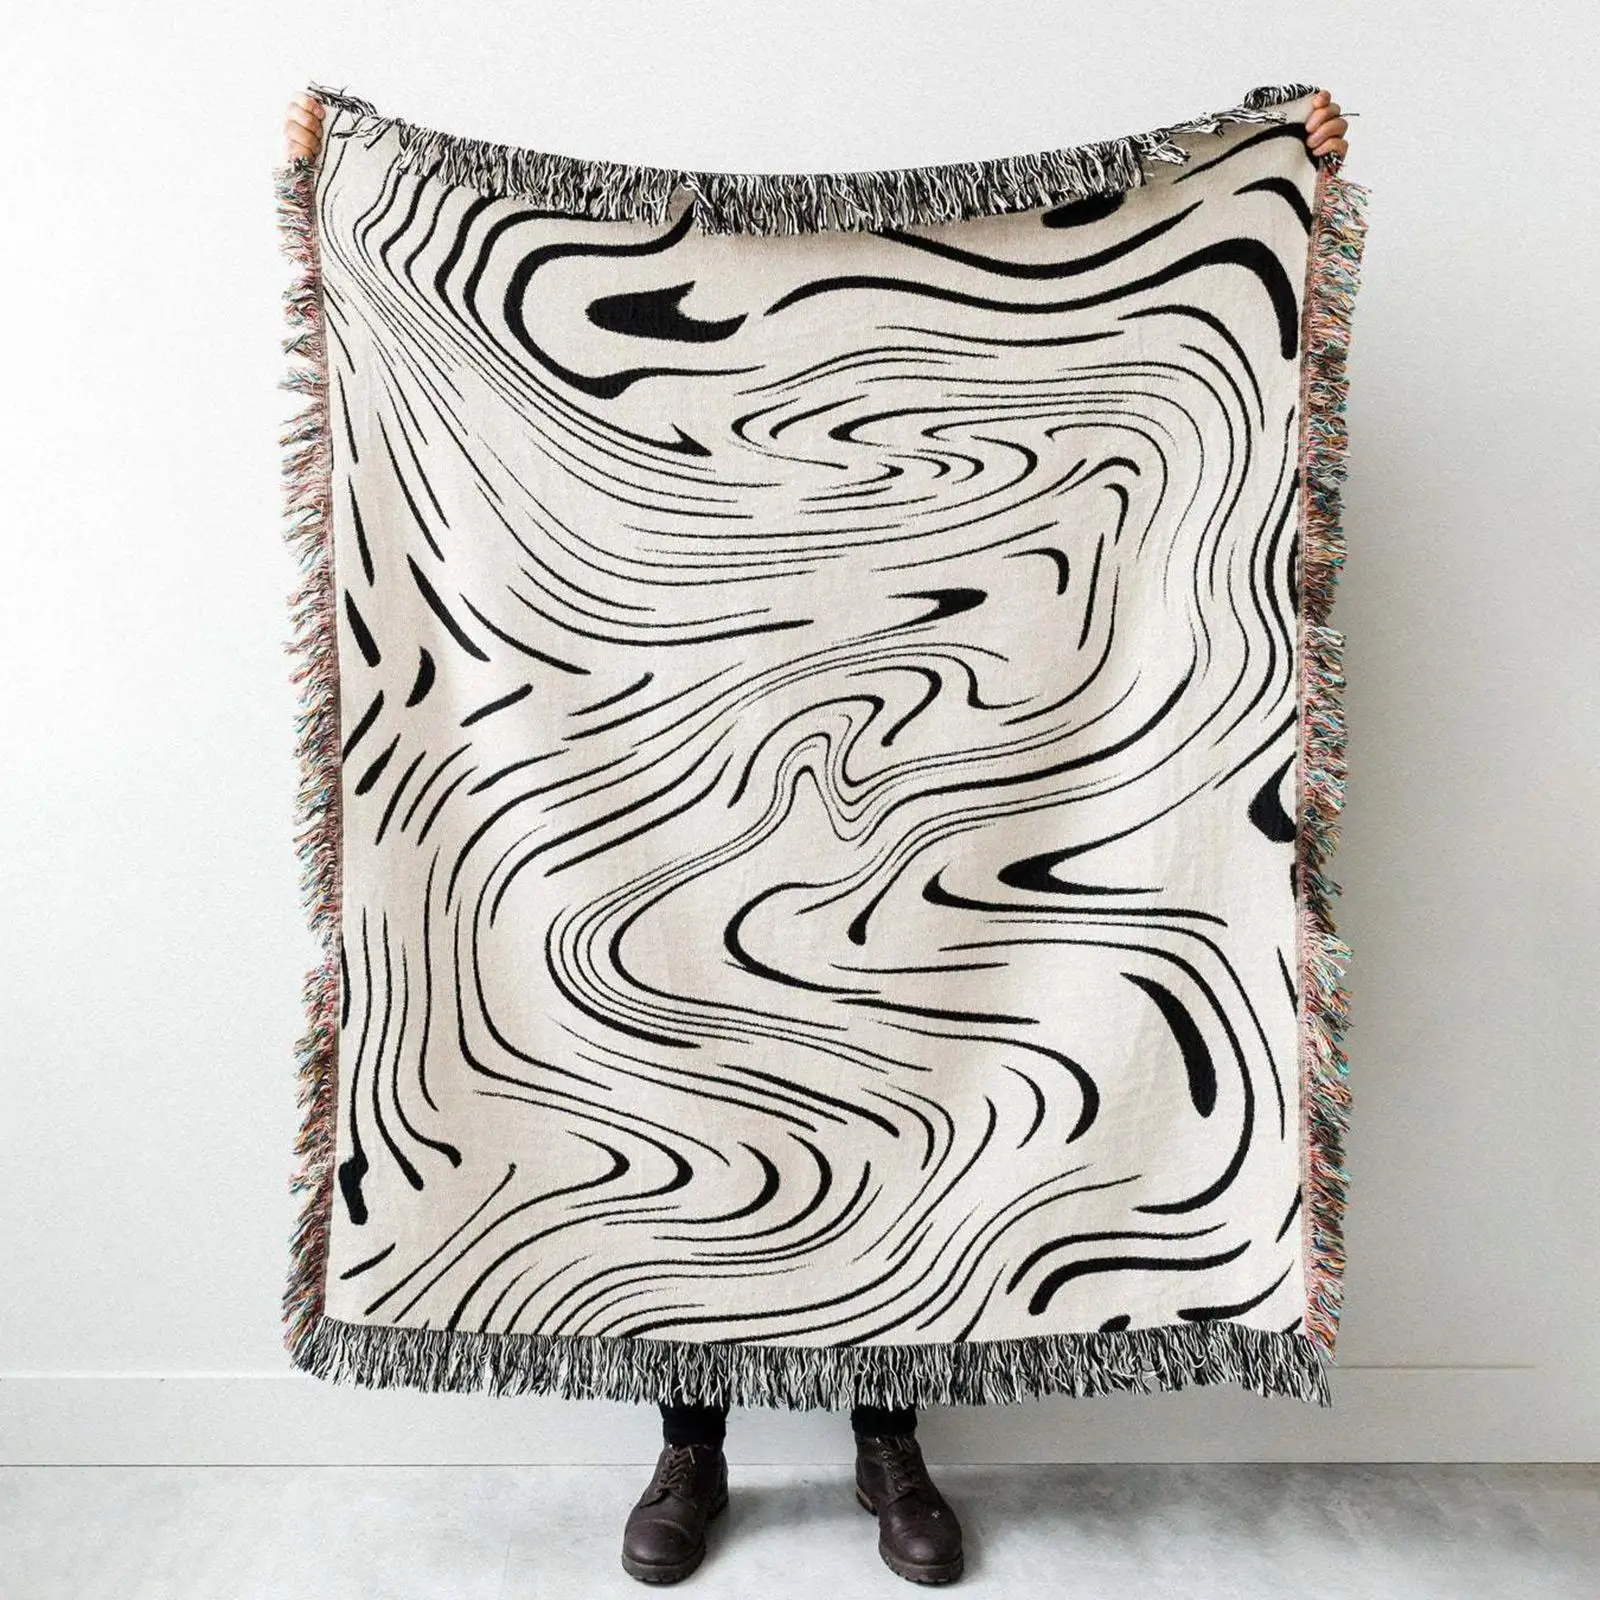 Casual Blanket Water Ripple Versatile Table Cover Wall Hangings Carpet Decoration for Bedspread Travel Dorm Living Room Home